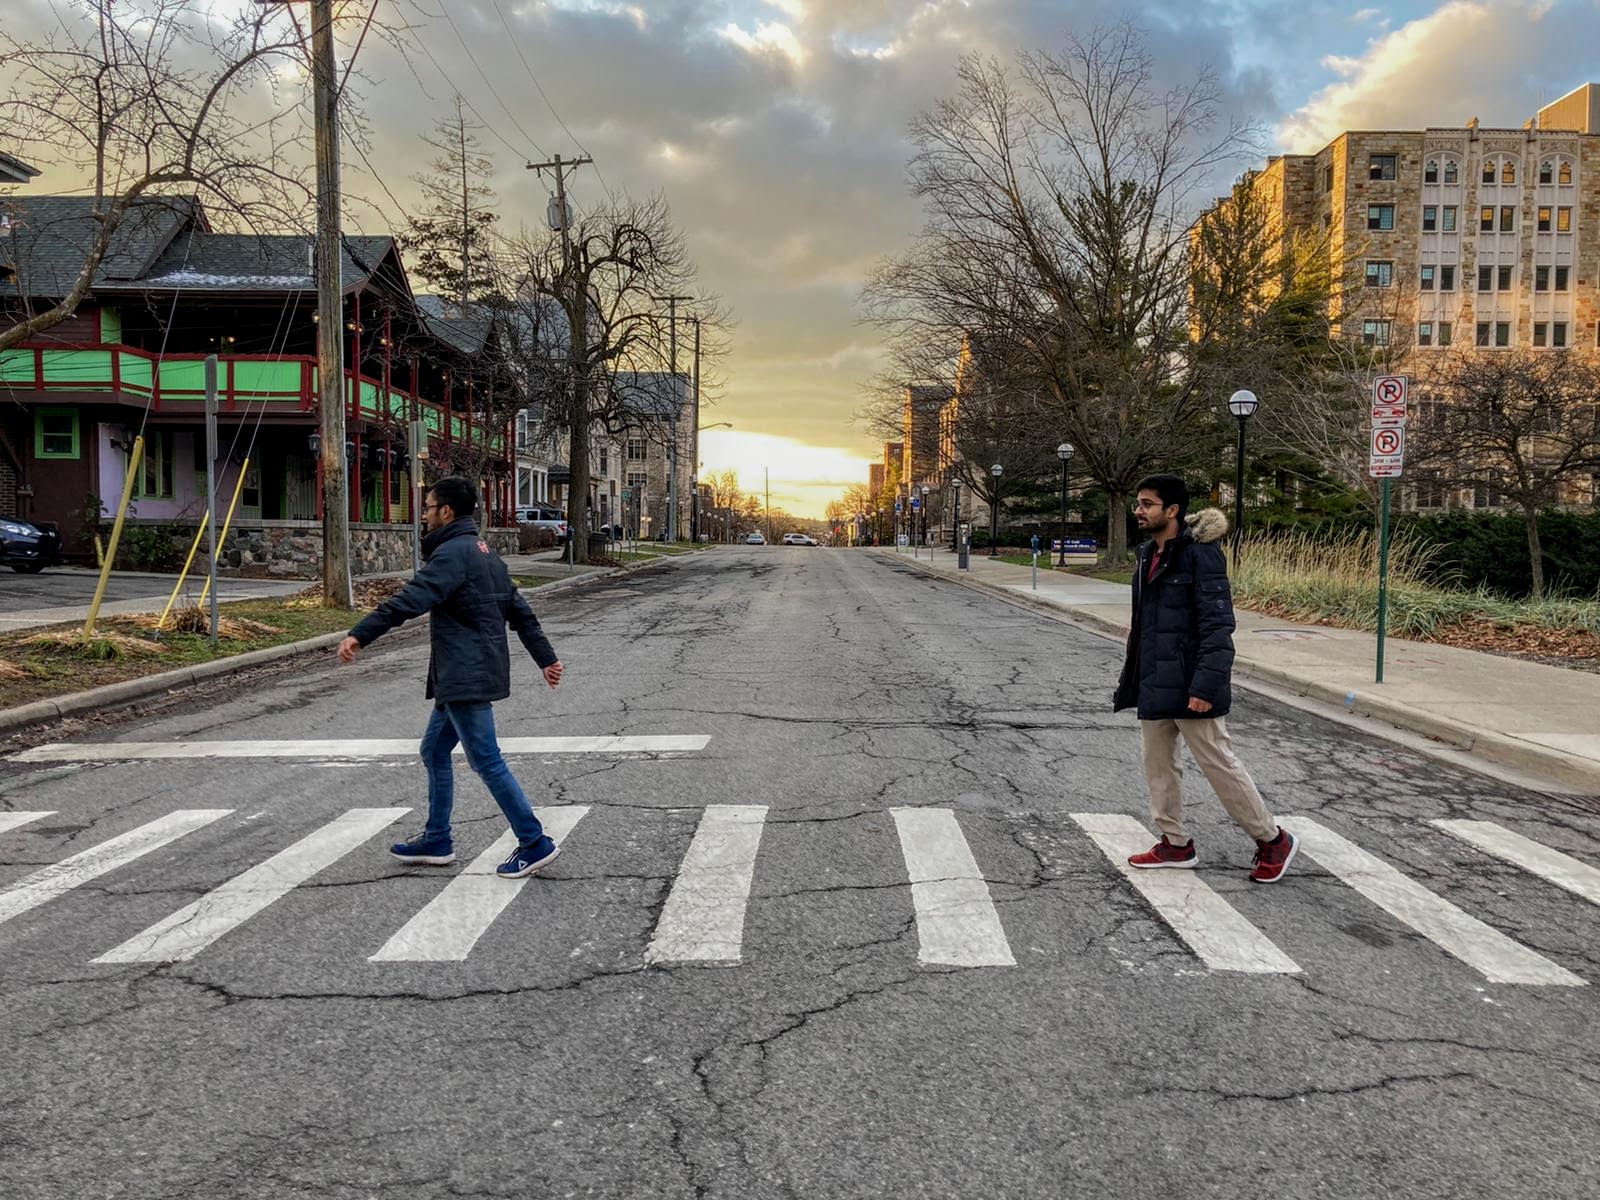 two students walk in a crosswalk mimicking Abbey Road album cover